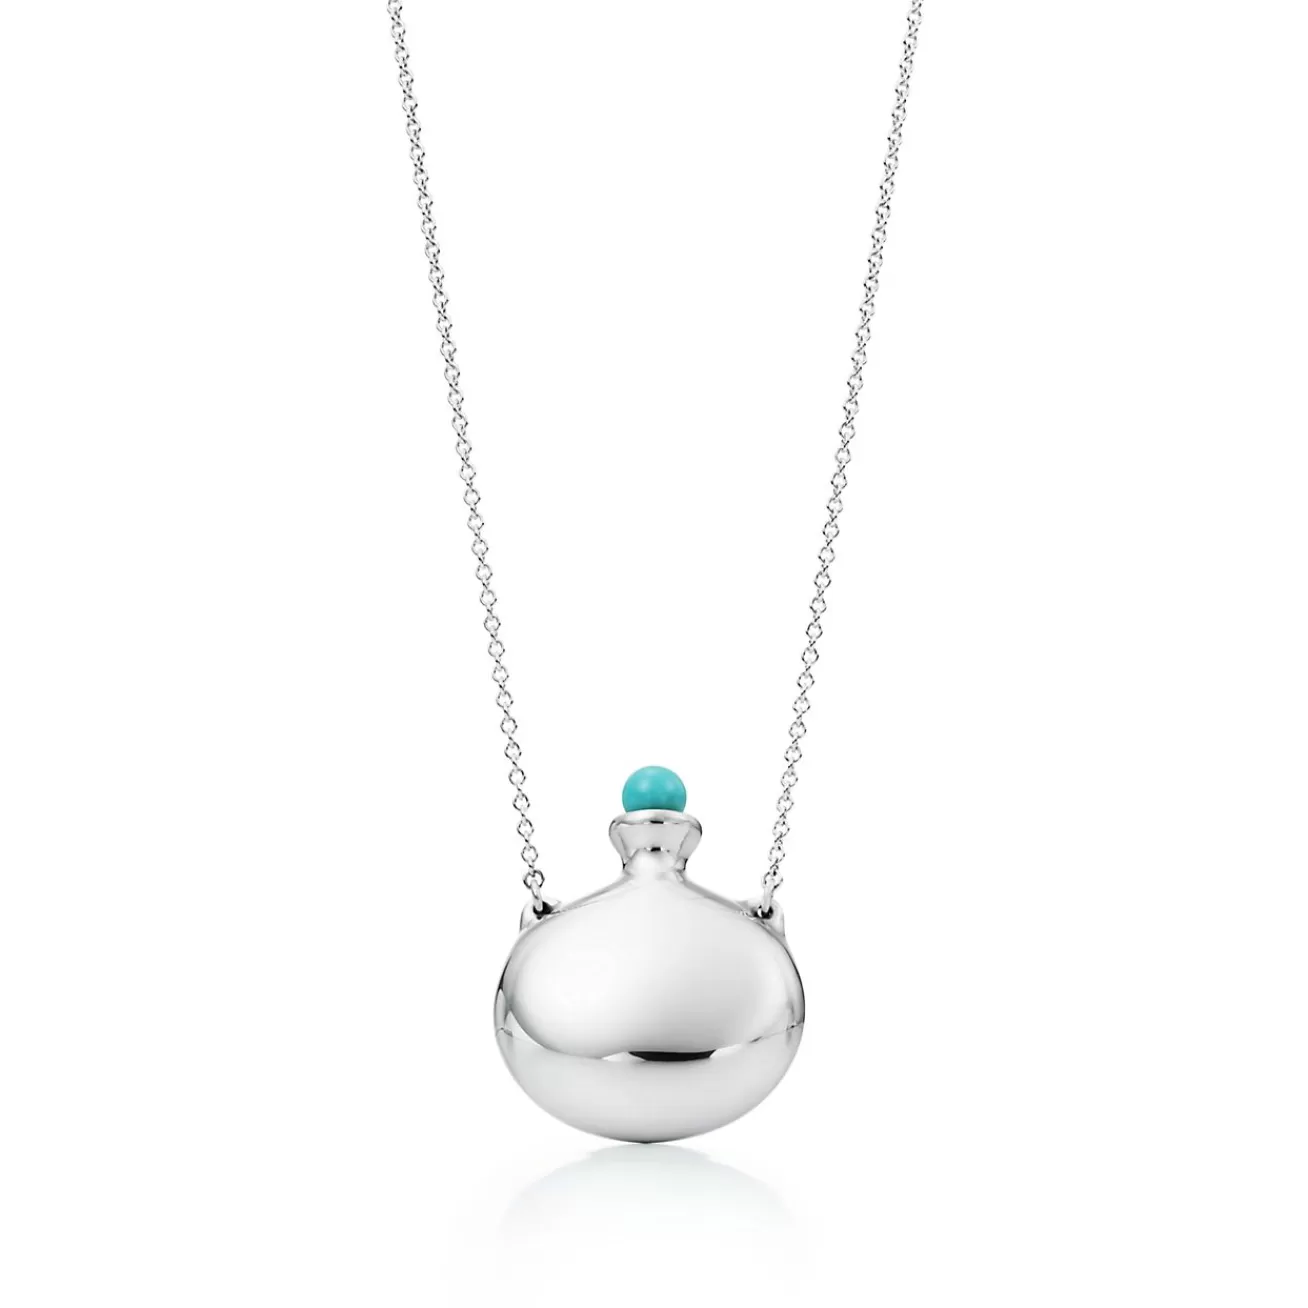 Tiffany & Co. Elsa Peretti® Bottle round bottle pendant in silver with a turquoise stopper. | ^ Necklaces & Pendants | Sterling Silver Jewelry